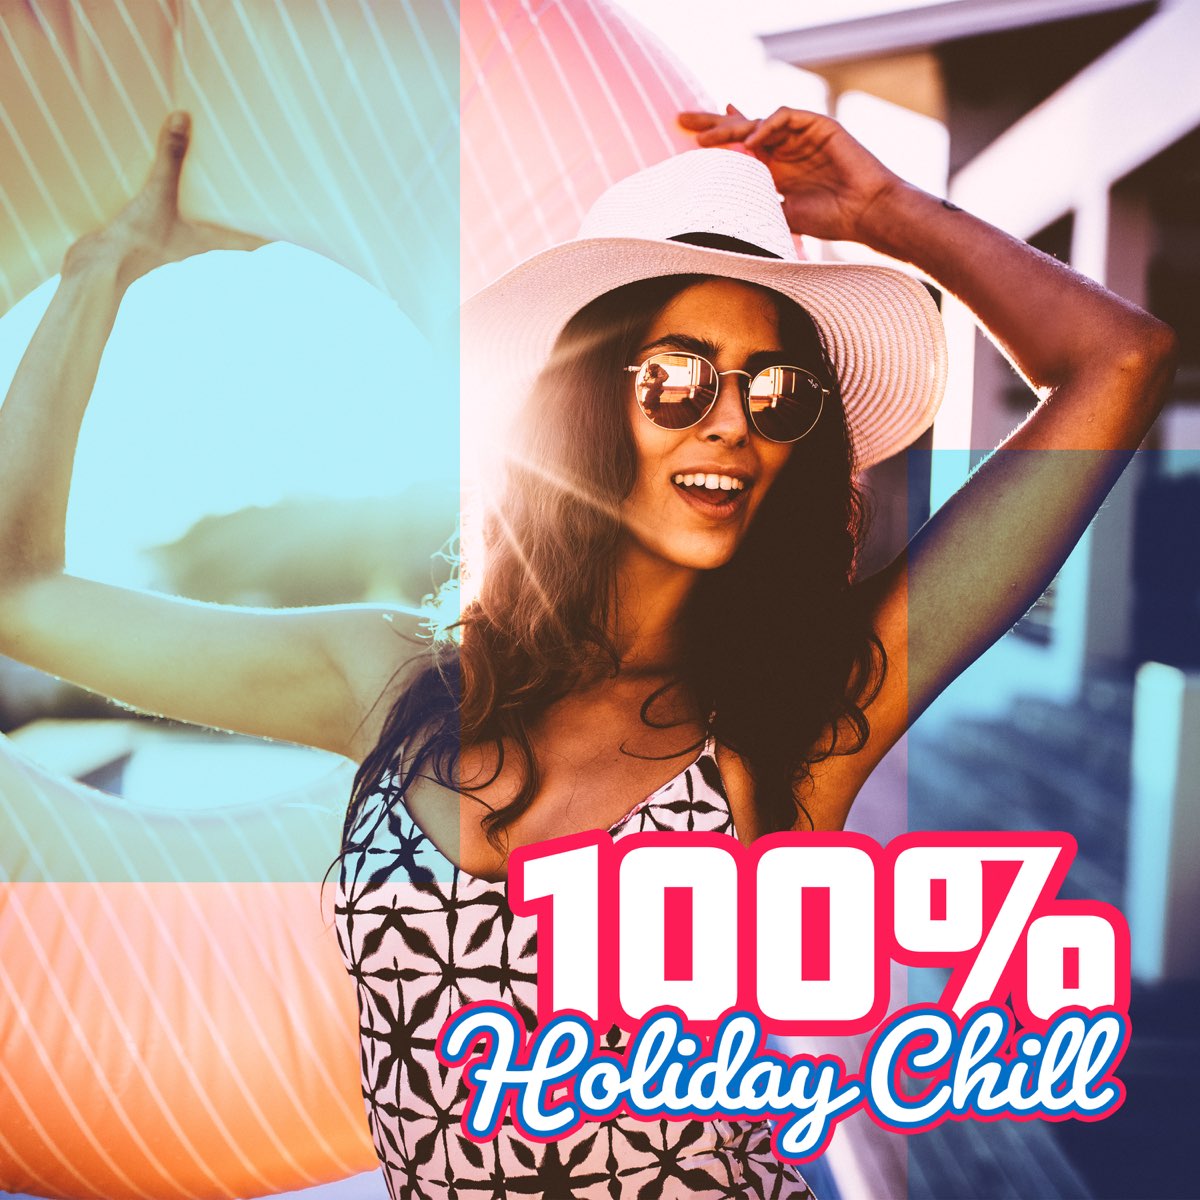 Dj chill. Summer Lounge - радио рекорд. Summer Lounge. Chilly Holliday. Clony Chill del Mar Inc feat. Mirjam - Drive.